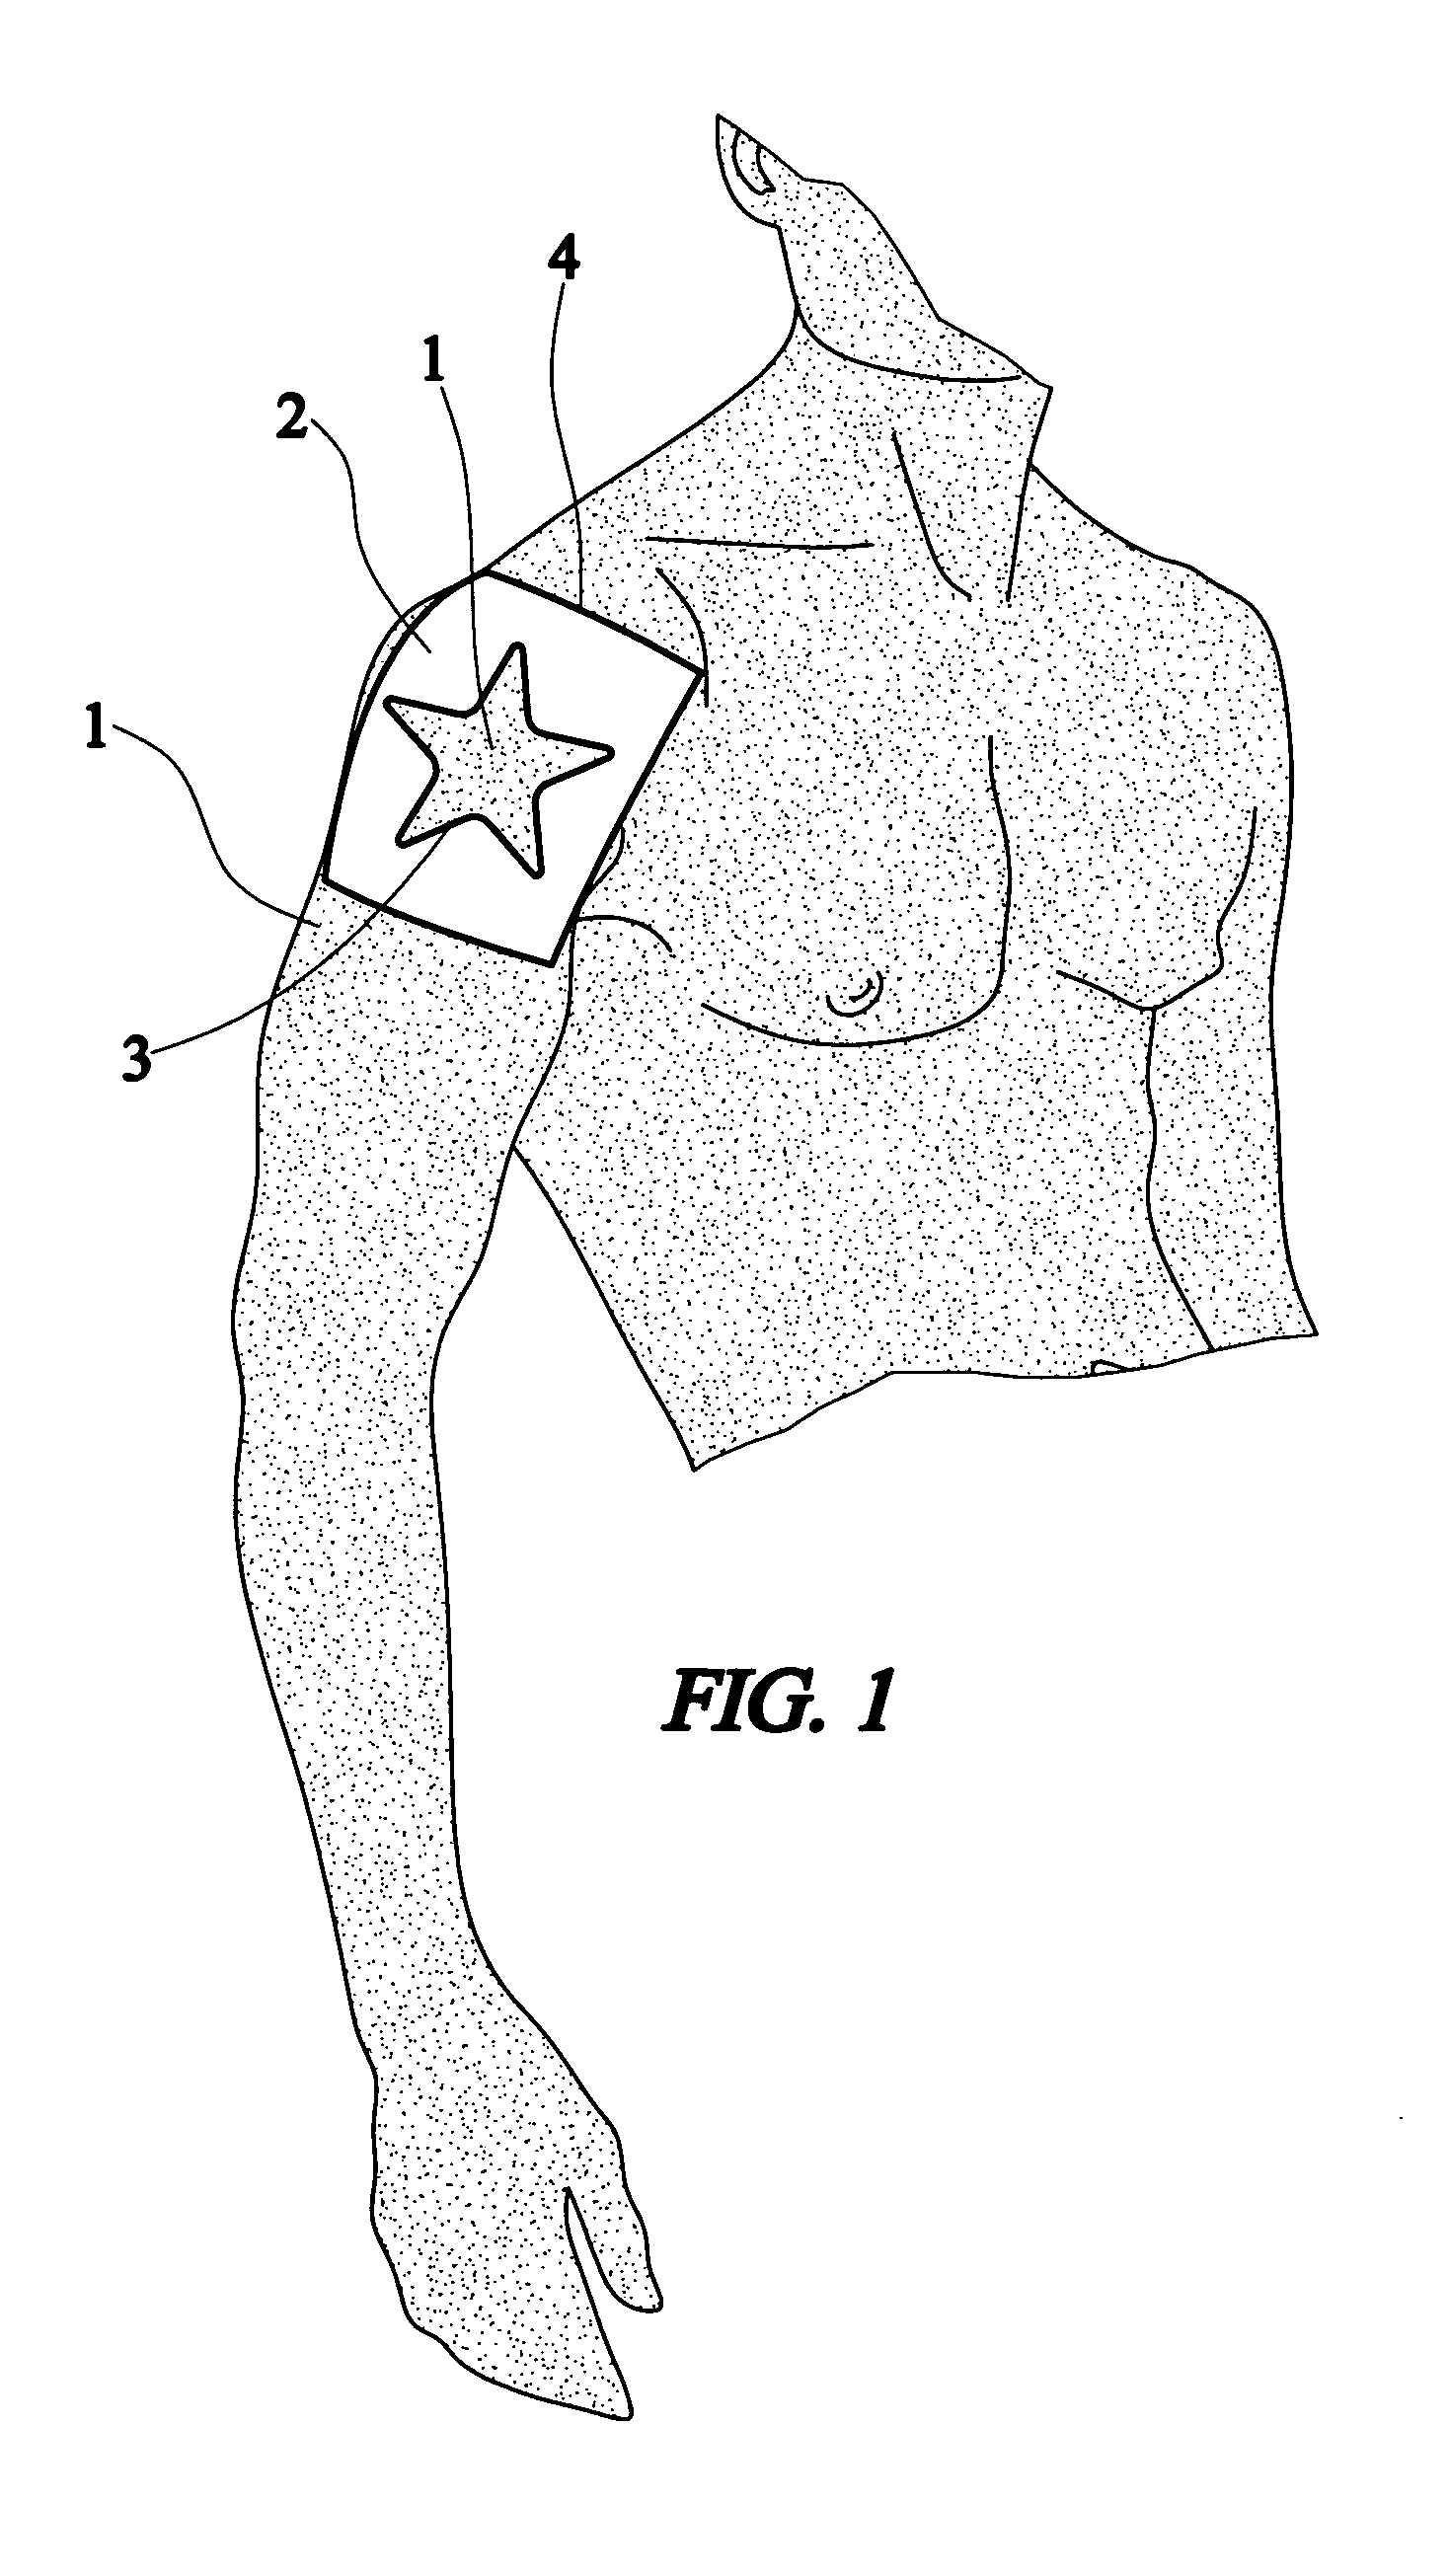 Method for producing a permanent or nearly permanent skin image, design or tattoo by freezing the skin